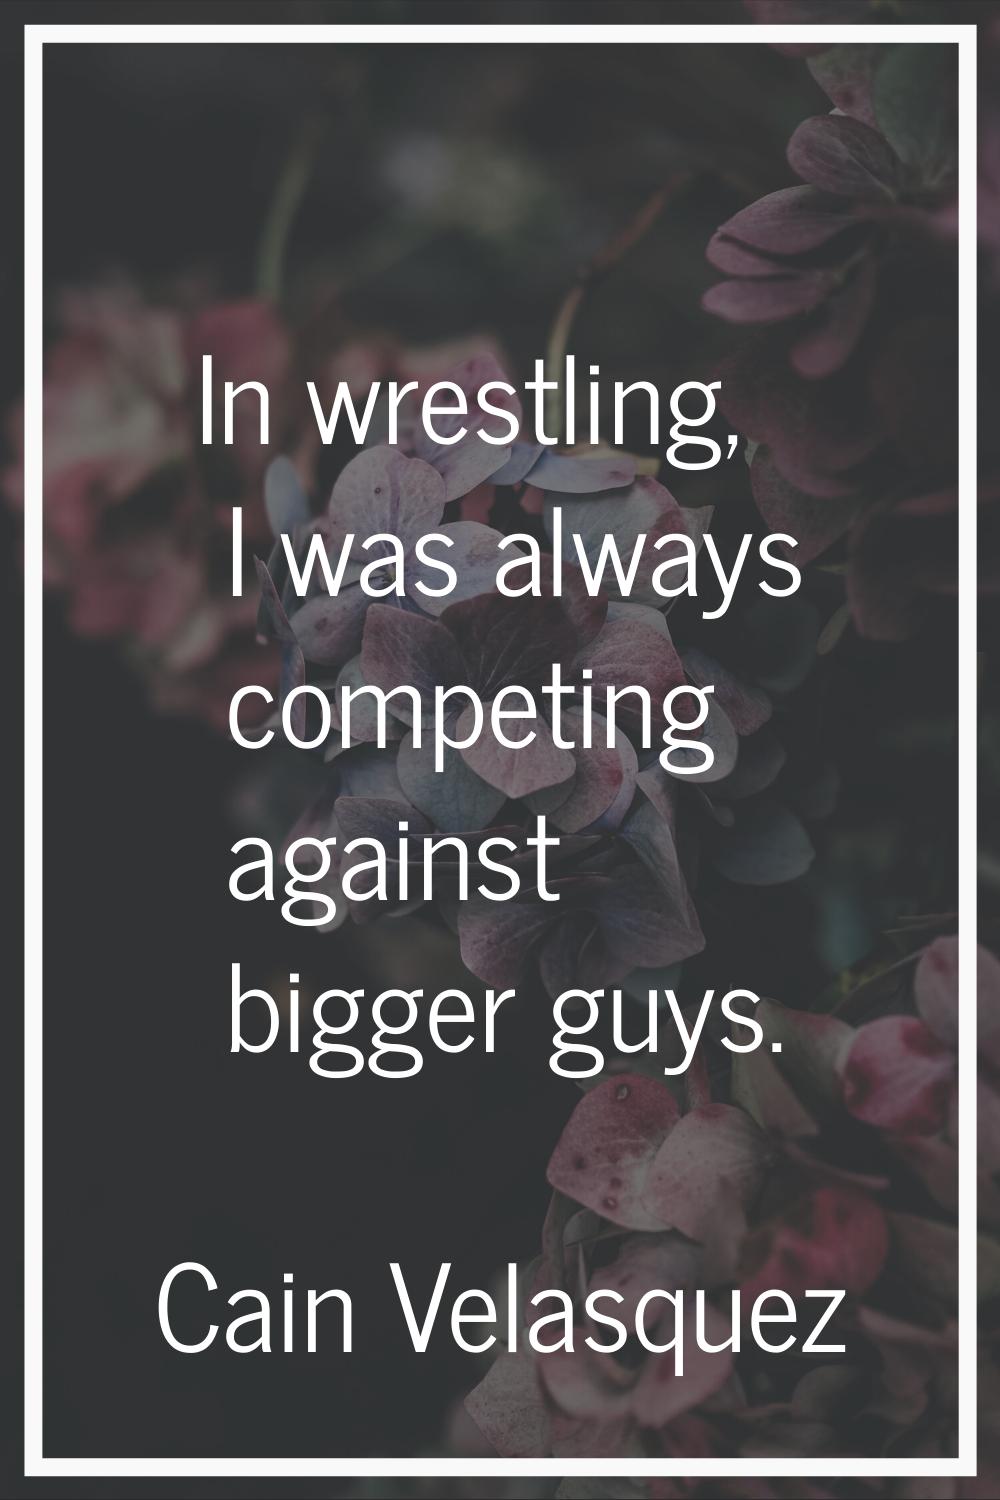 In wrestling, I was always competing against bigger guys.